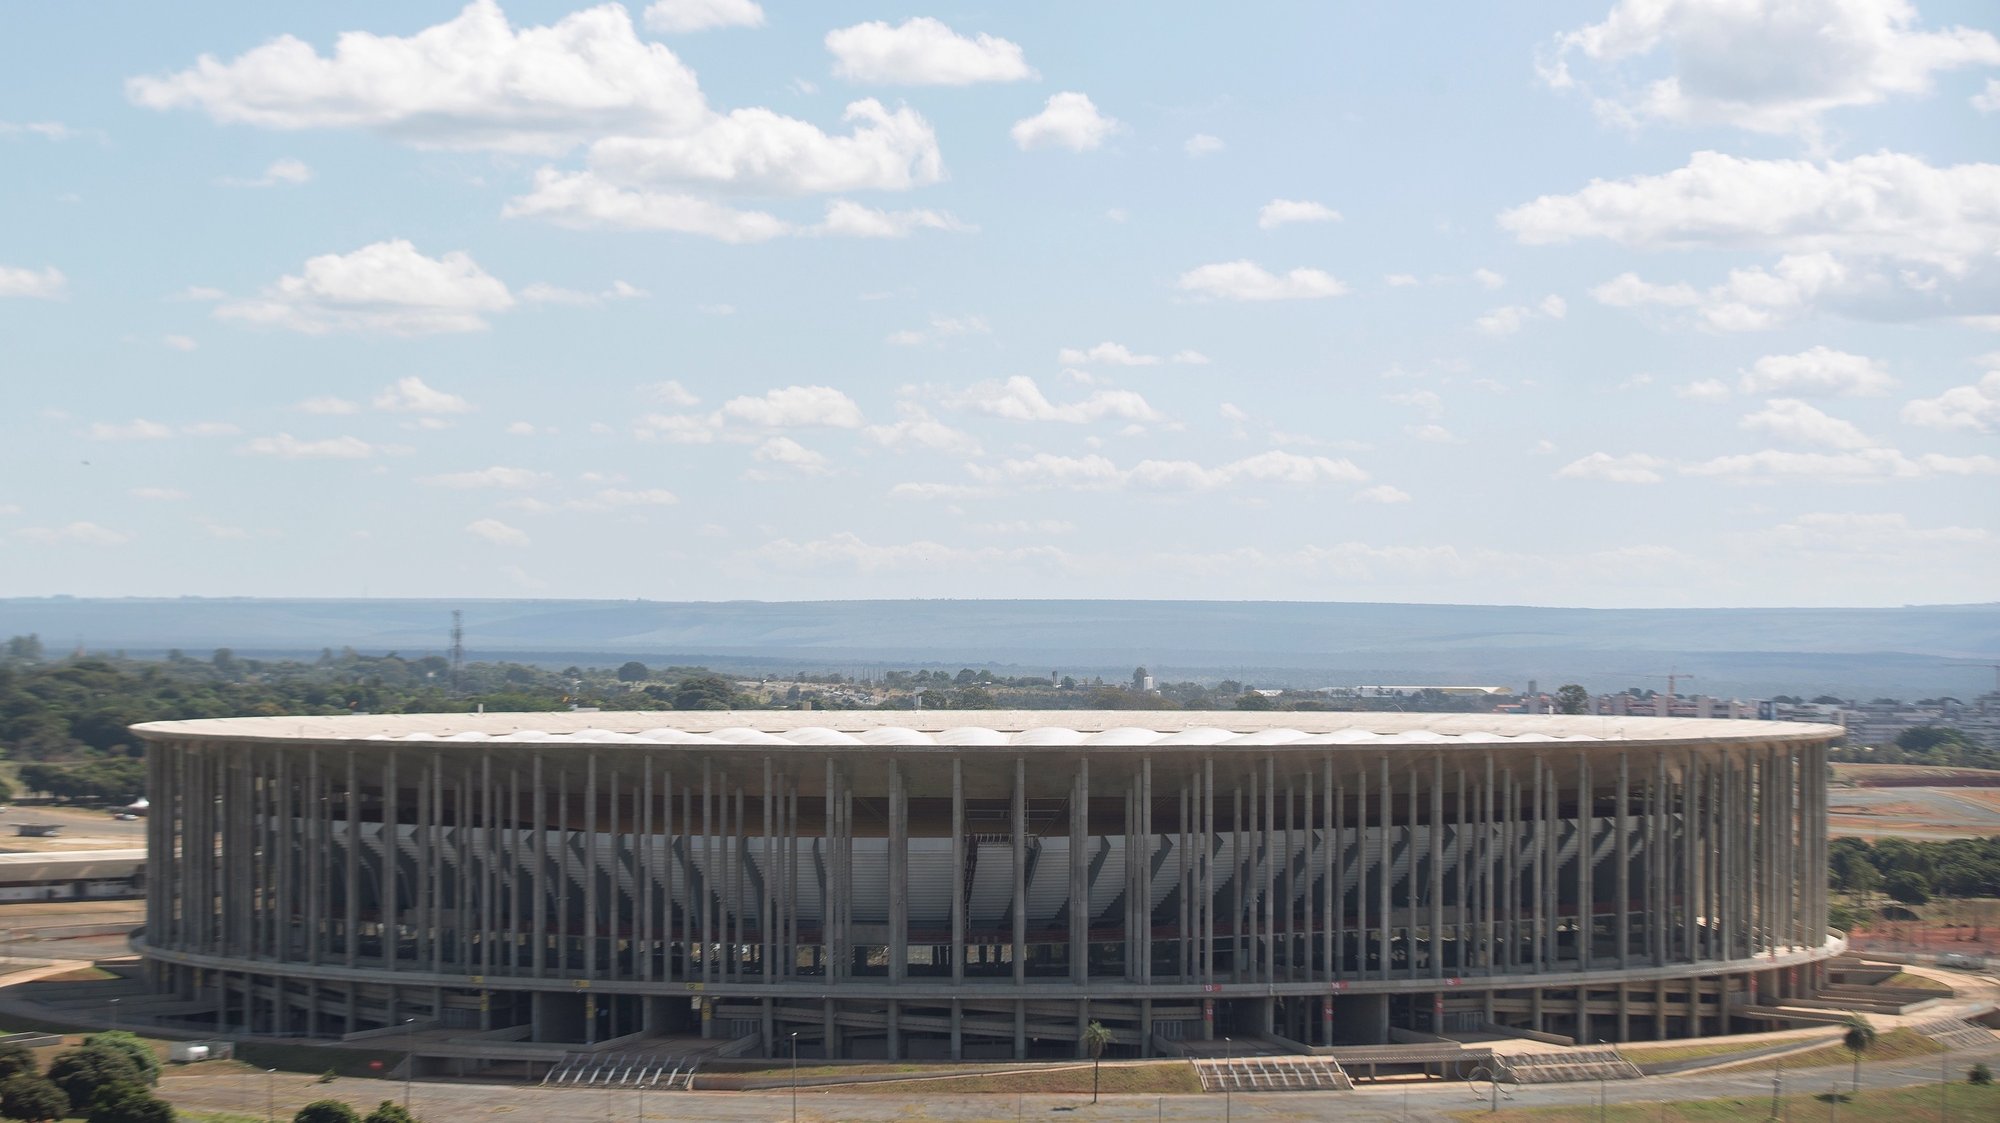 epa09243595 Exterior view of the Mane Garrincha stadium, one of the four venues for the Copa America 2021, in Brasilia, Brazil, 02 June 2021. Conmebol indicated that the cities of Brasilia, Rio de Janeiro, Cuiaba (Matto Grosso) and Goiania (Goias) will host the Copa America, after Argentina and Colombia gave up being the tournament venues, as was originally planned, due to the coronavirus pandemic.  EPA/Joedson Alves